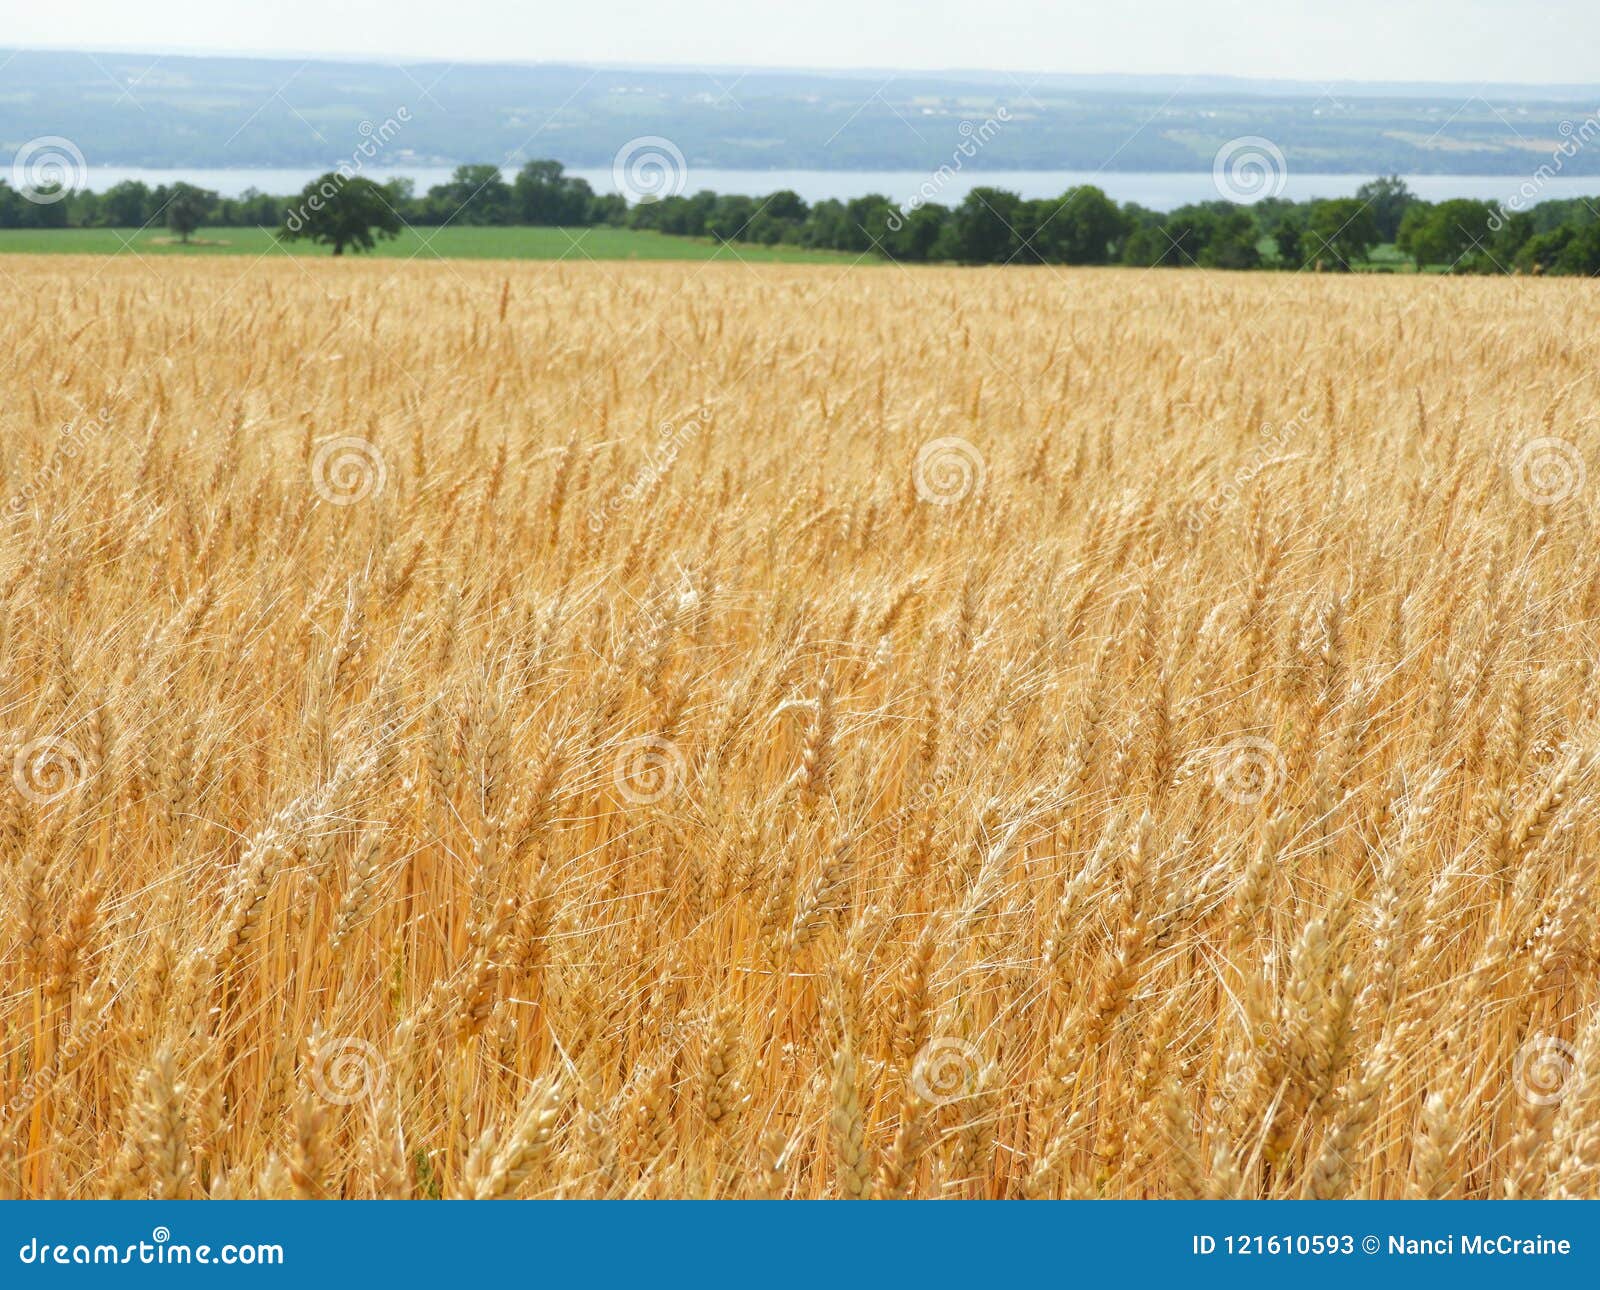 amber waves of grain in nys countryside